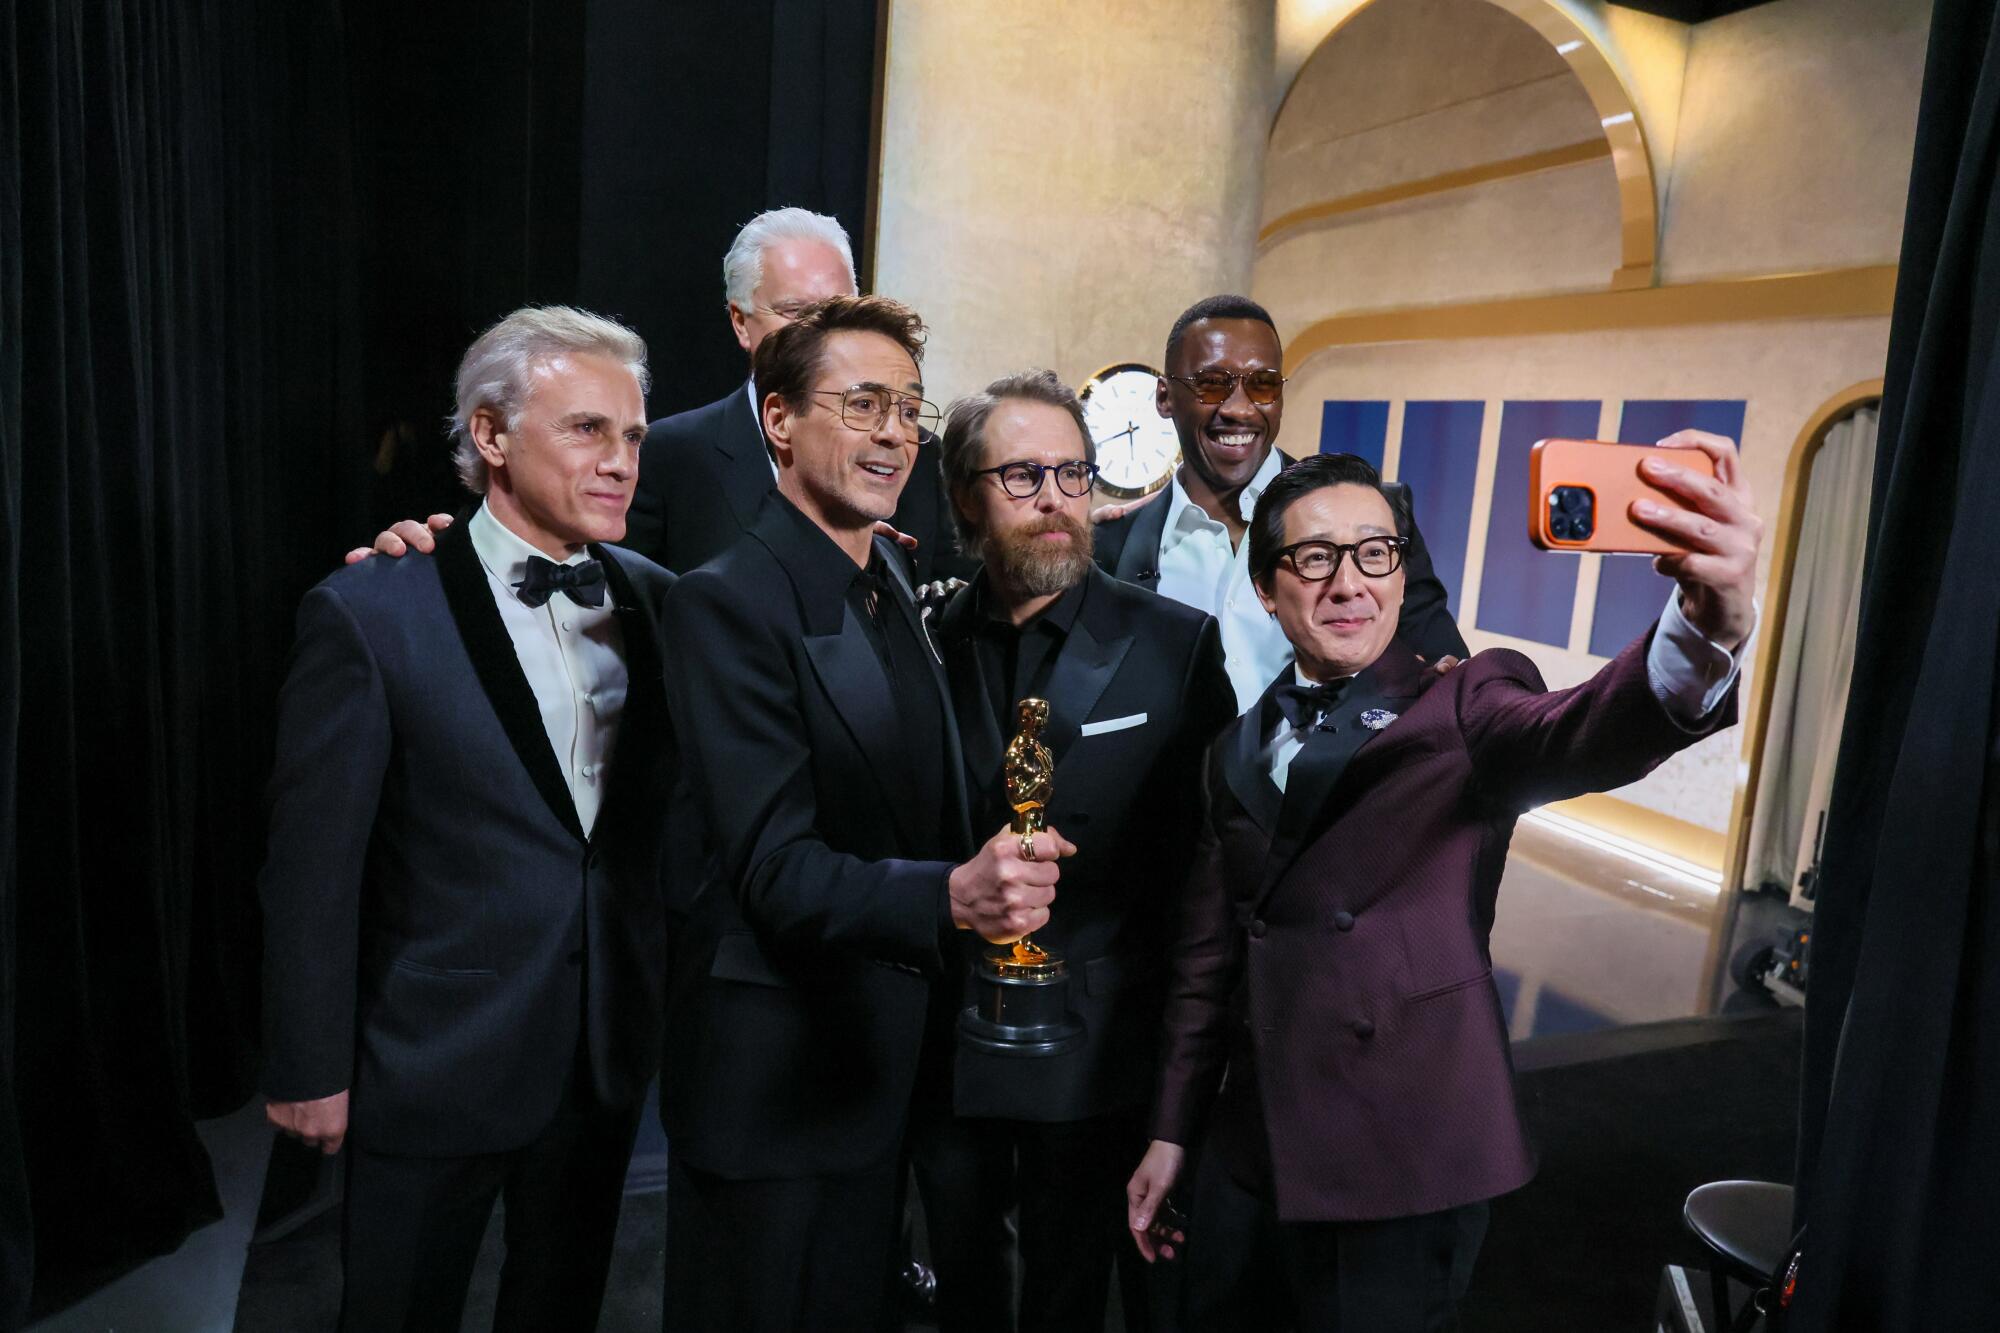 Supporting Actor winner Robert Downey, Jr. surrounded by presenters back stage during the the 96th Annual Academy Awards.